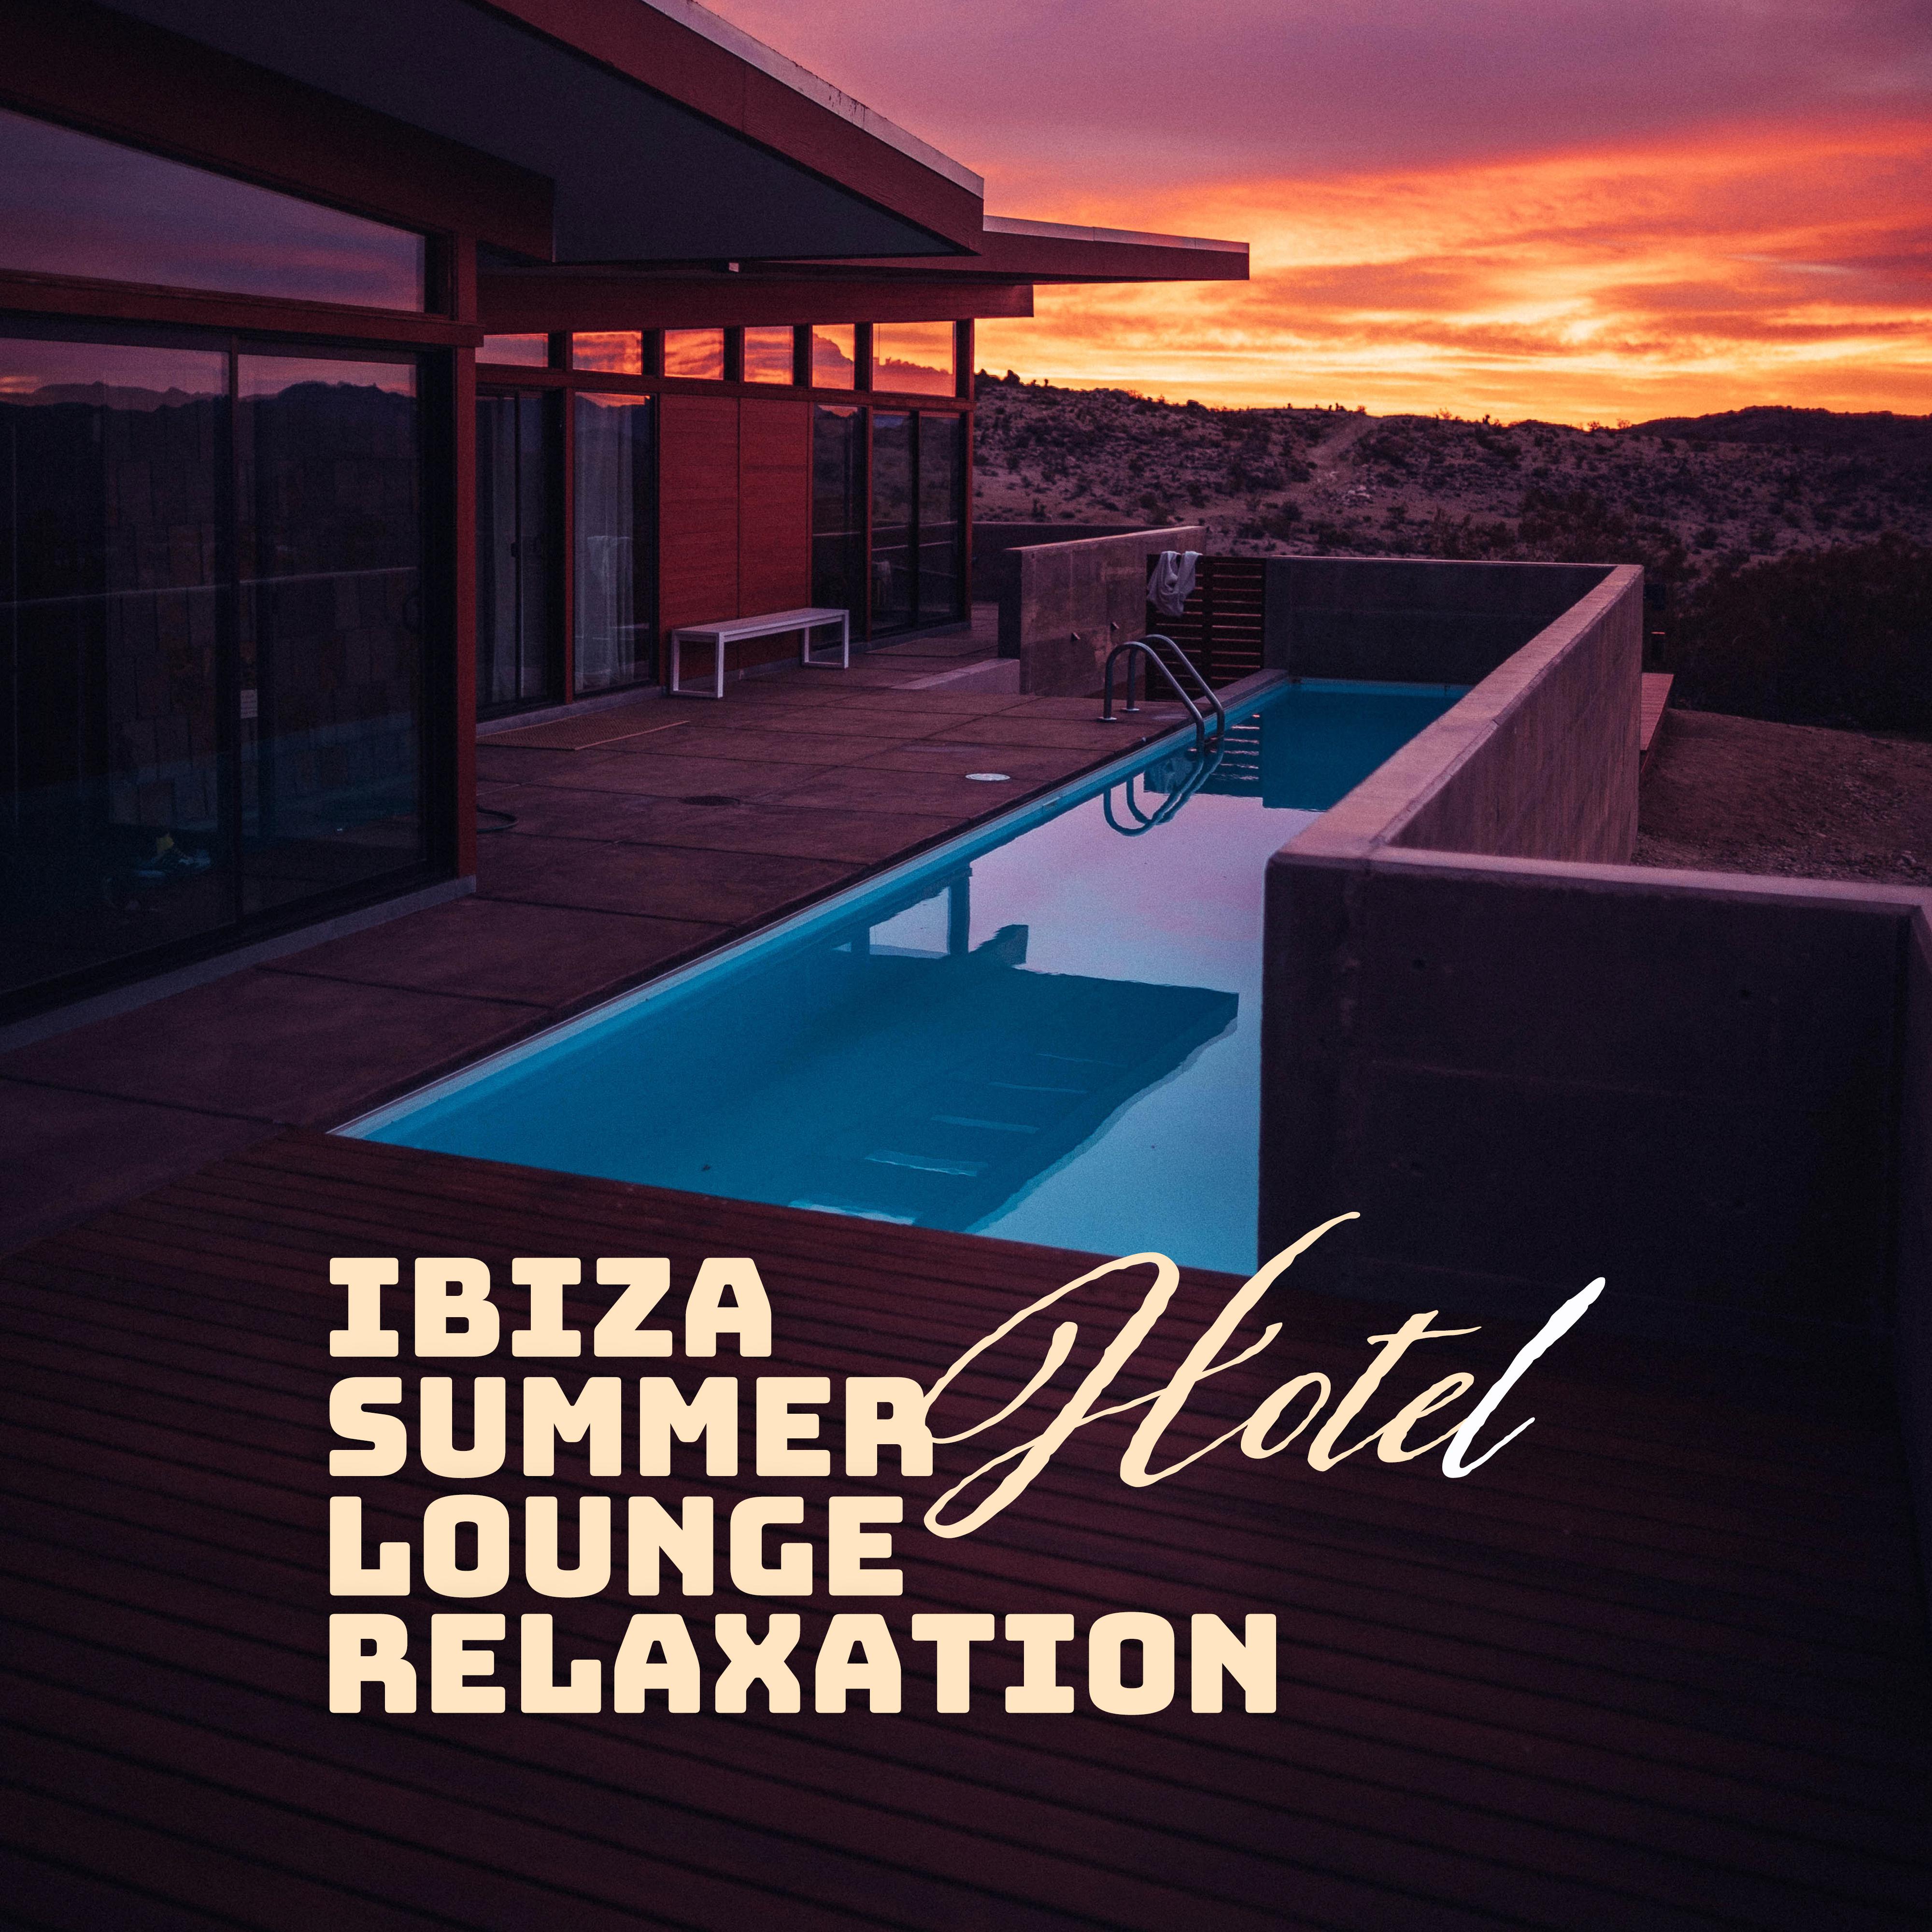 Ibiza Summer Hotel Lounge Relaxation: Compilation of Best Relaxing Chill Out 2019 Vibes, Beach Rest Music, Deep Calming Beats, Stress Relief